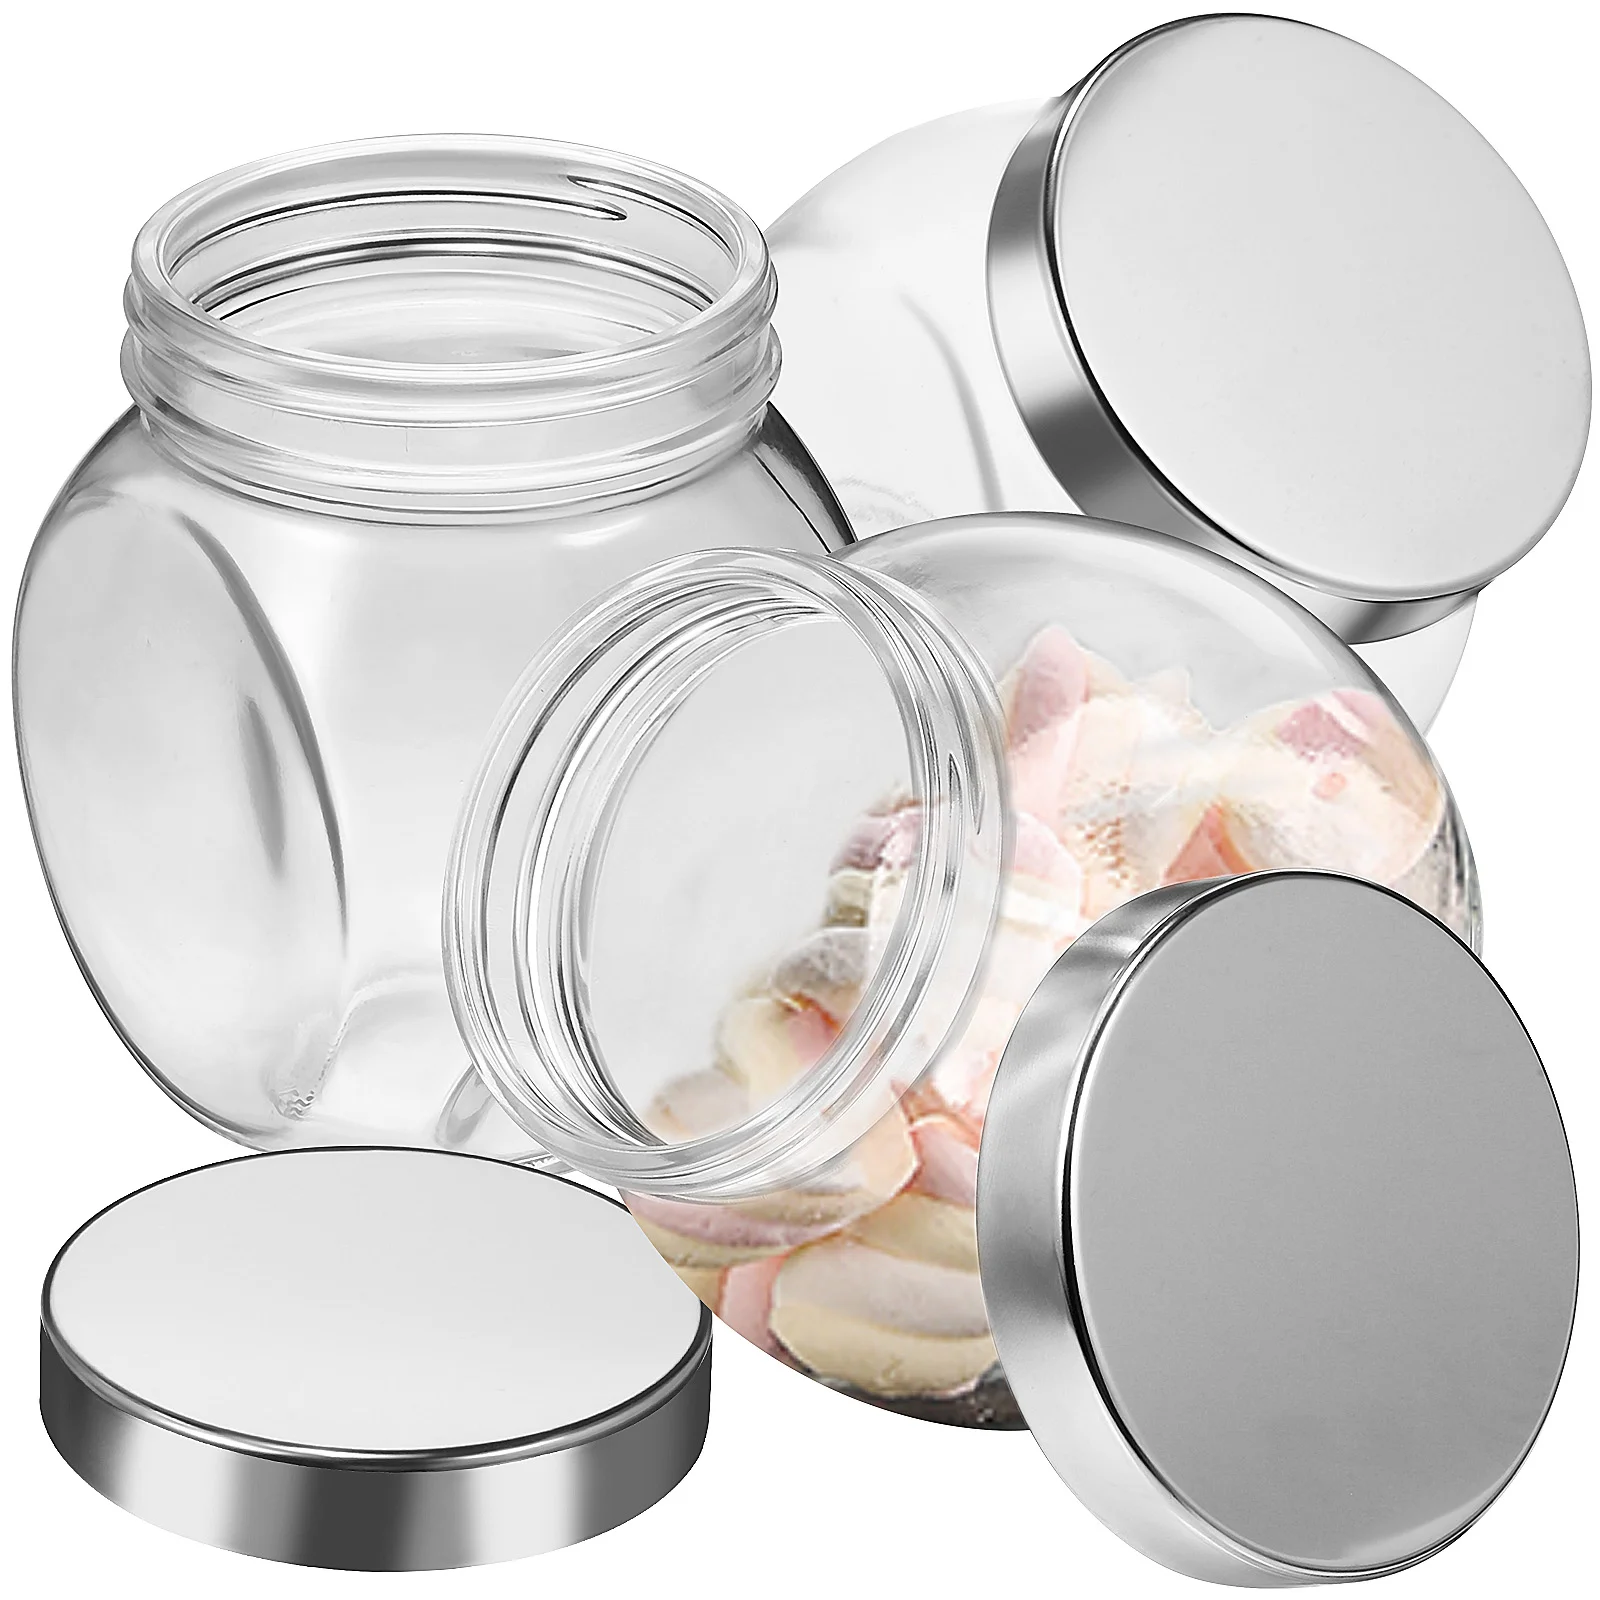 

3 Pcs Food Containers Glass Sealed Jar Canisters With Airtight Lids Jars Cereals Tea Clear Grain Storage Tank Kitchen